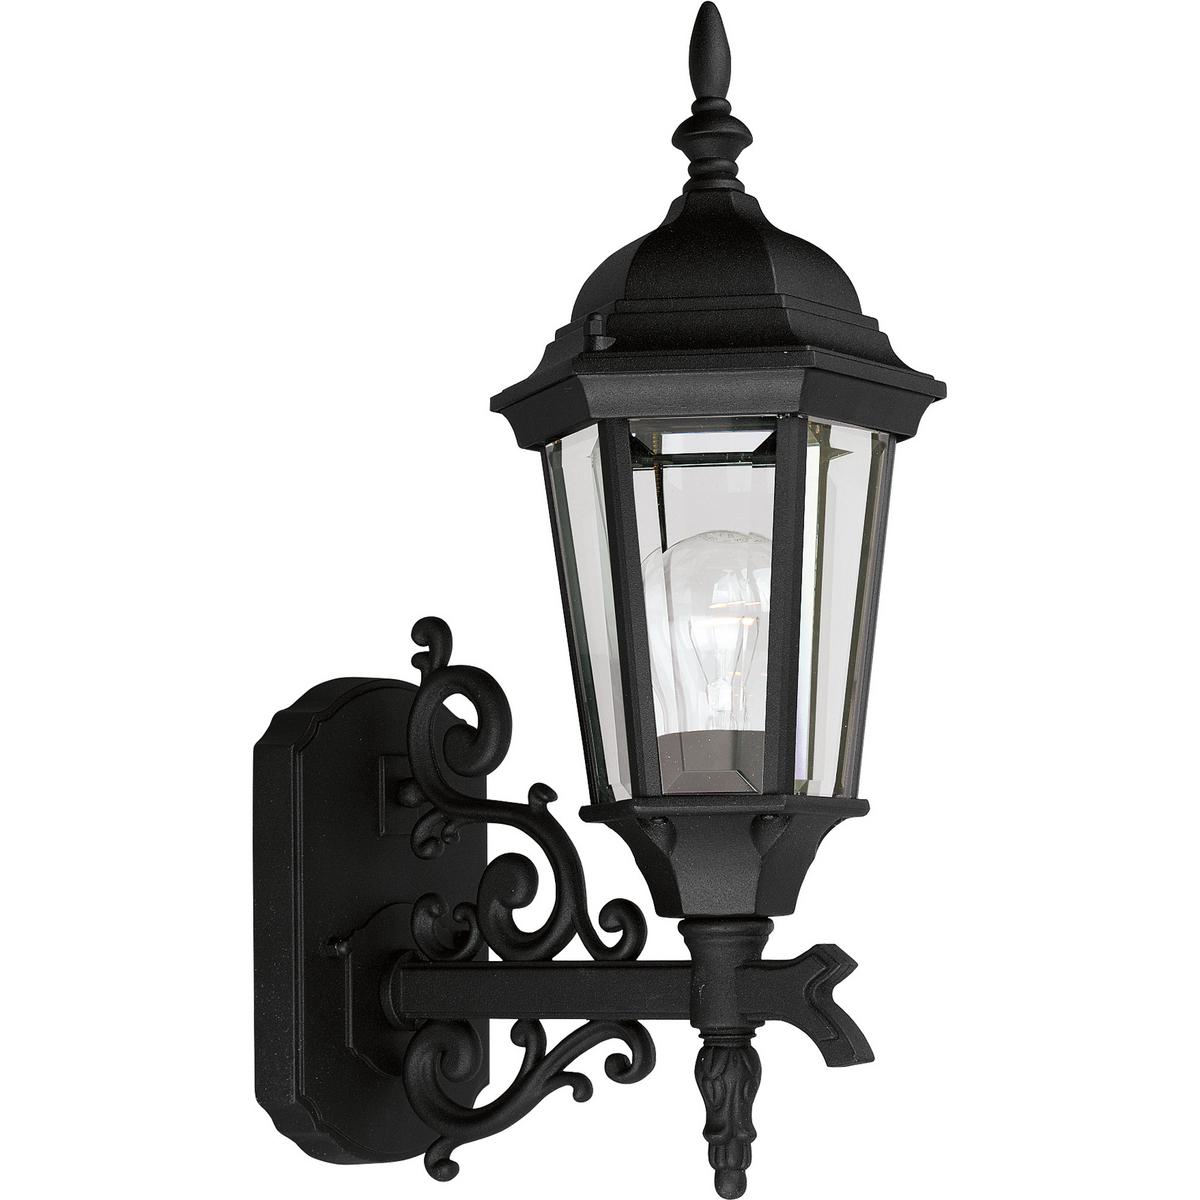 Hubbell P5681-31 The Welbourne collection features hexagonal framework with vine inspired scrolls and clear beveled glass panels. Cast aluminum construction with durable powder coat finish. One-light 6-1/2 in bottom mount outdoor wall lantern in a Black finish.  ; Hexagon